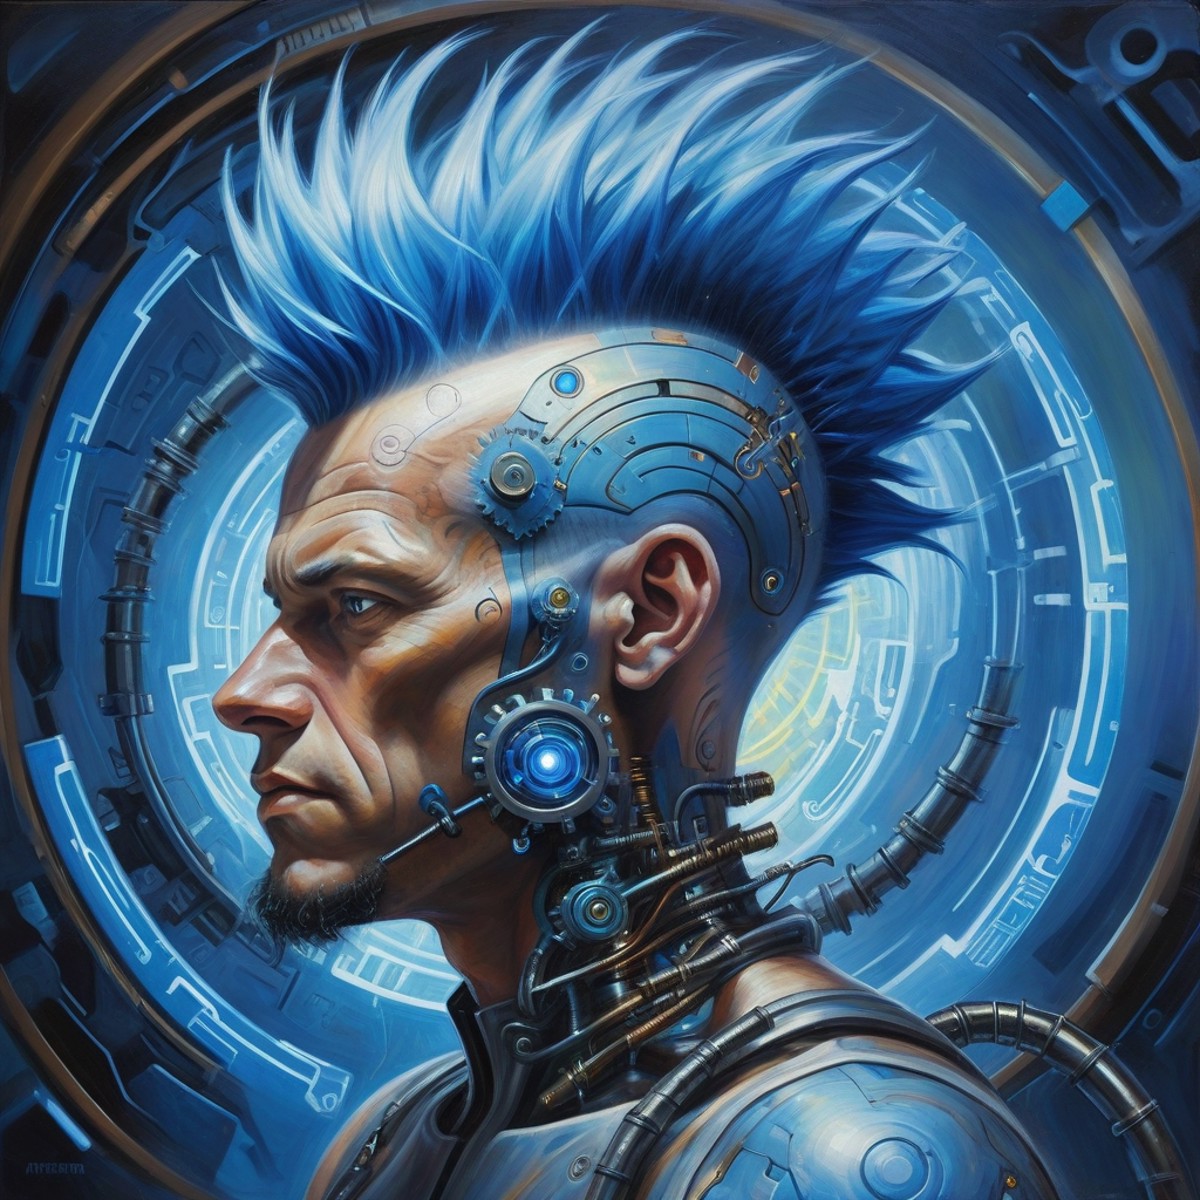 cinematic oil painting of a science fiction man with a blue mohawk and mechanical circuitry in a mystical technological sw...